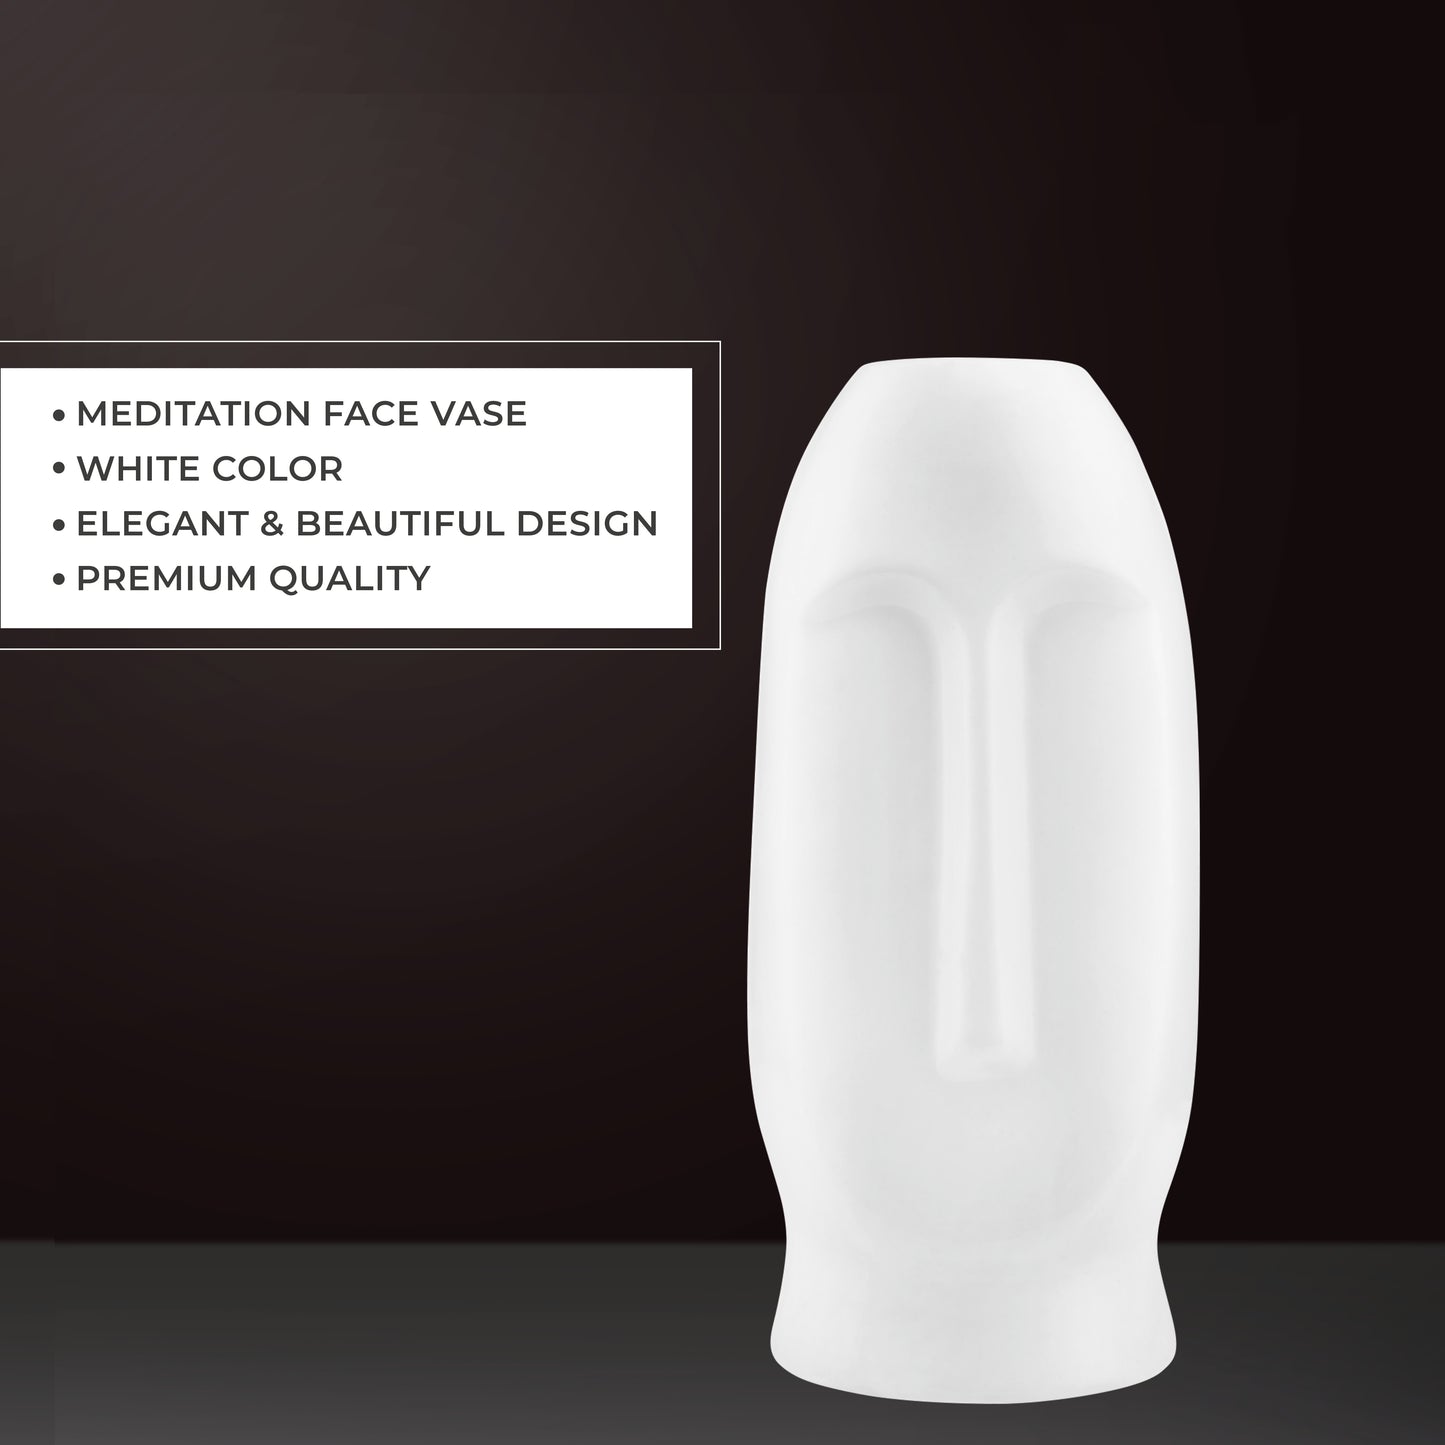 LuxeLane 'Face Vase' for Home Decor - White Gloss, 9 inches, Pack of 1